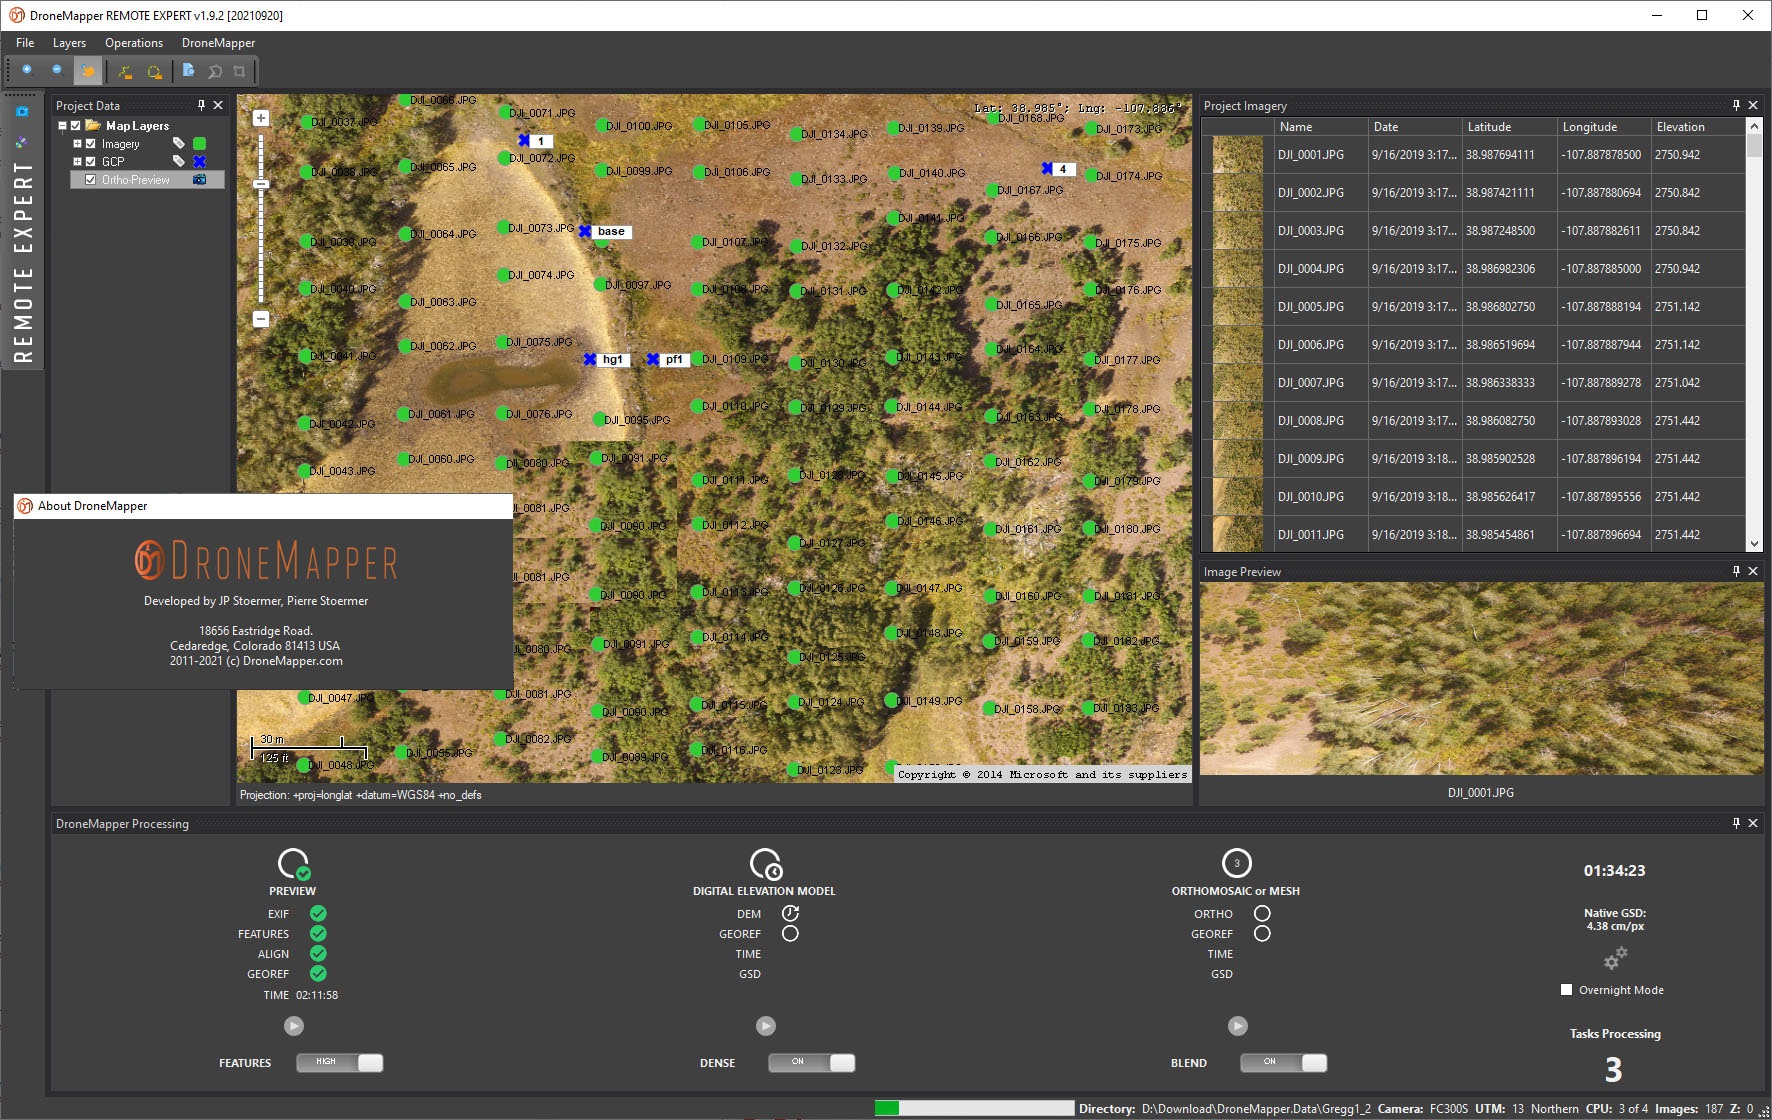 Working with DroneMapper REMOTE EXPERT v1.9.2